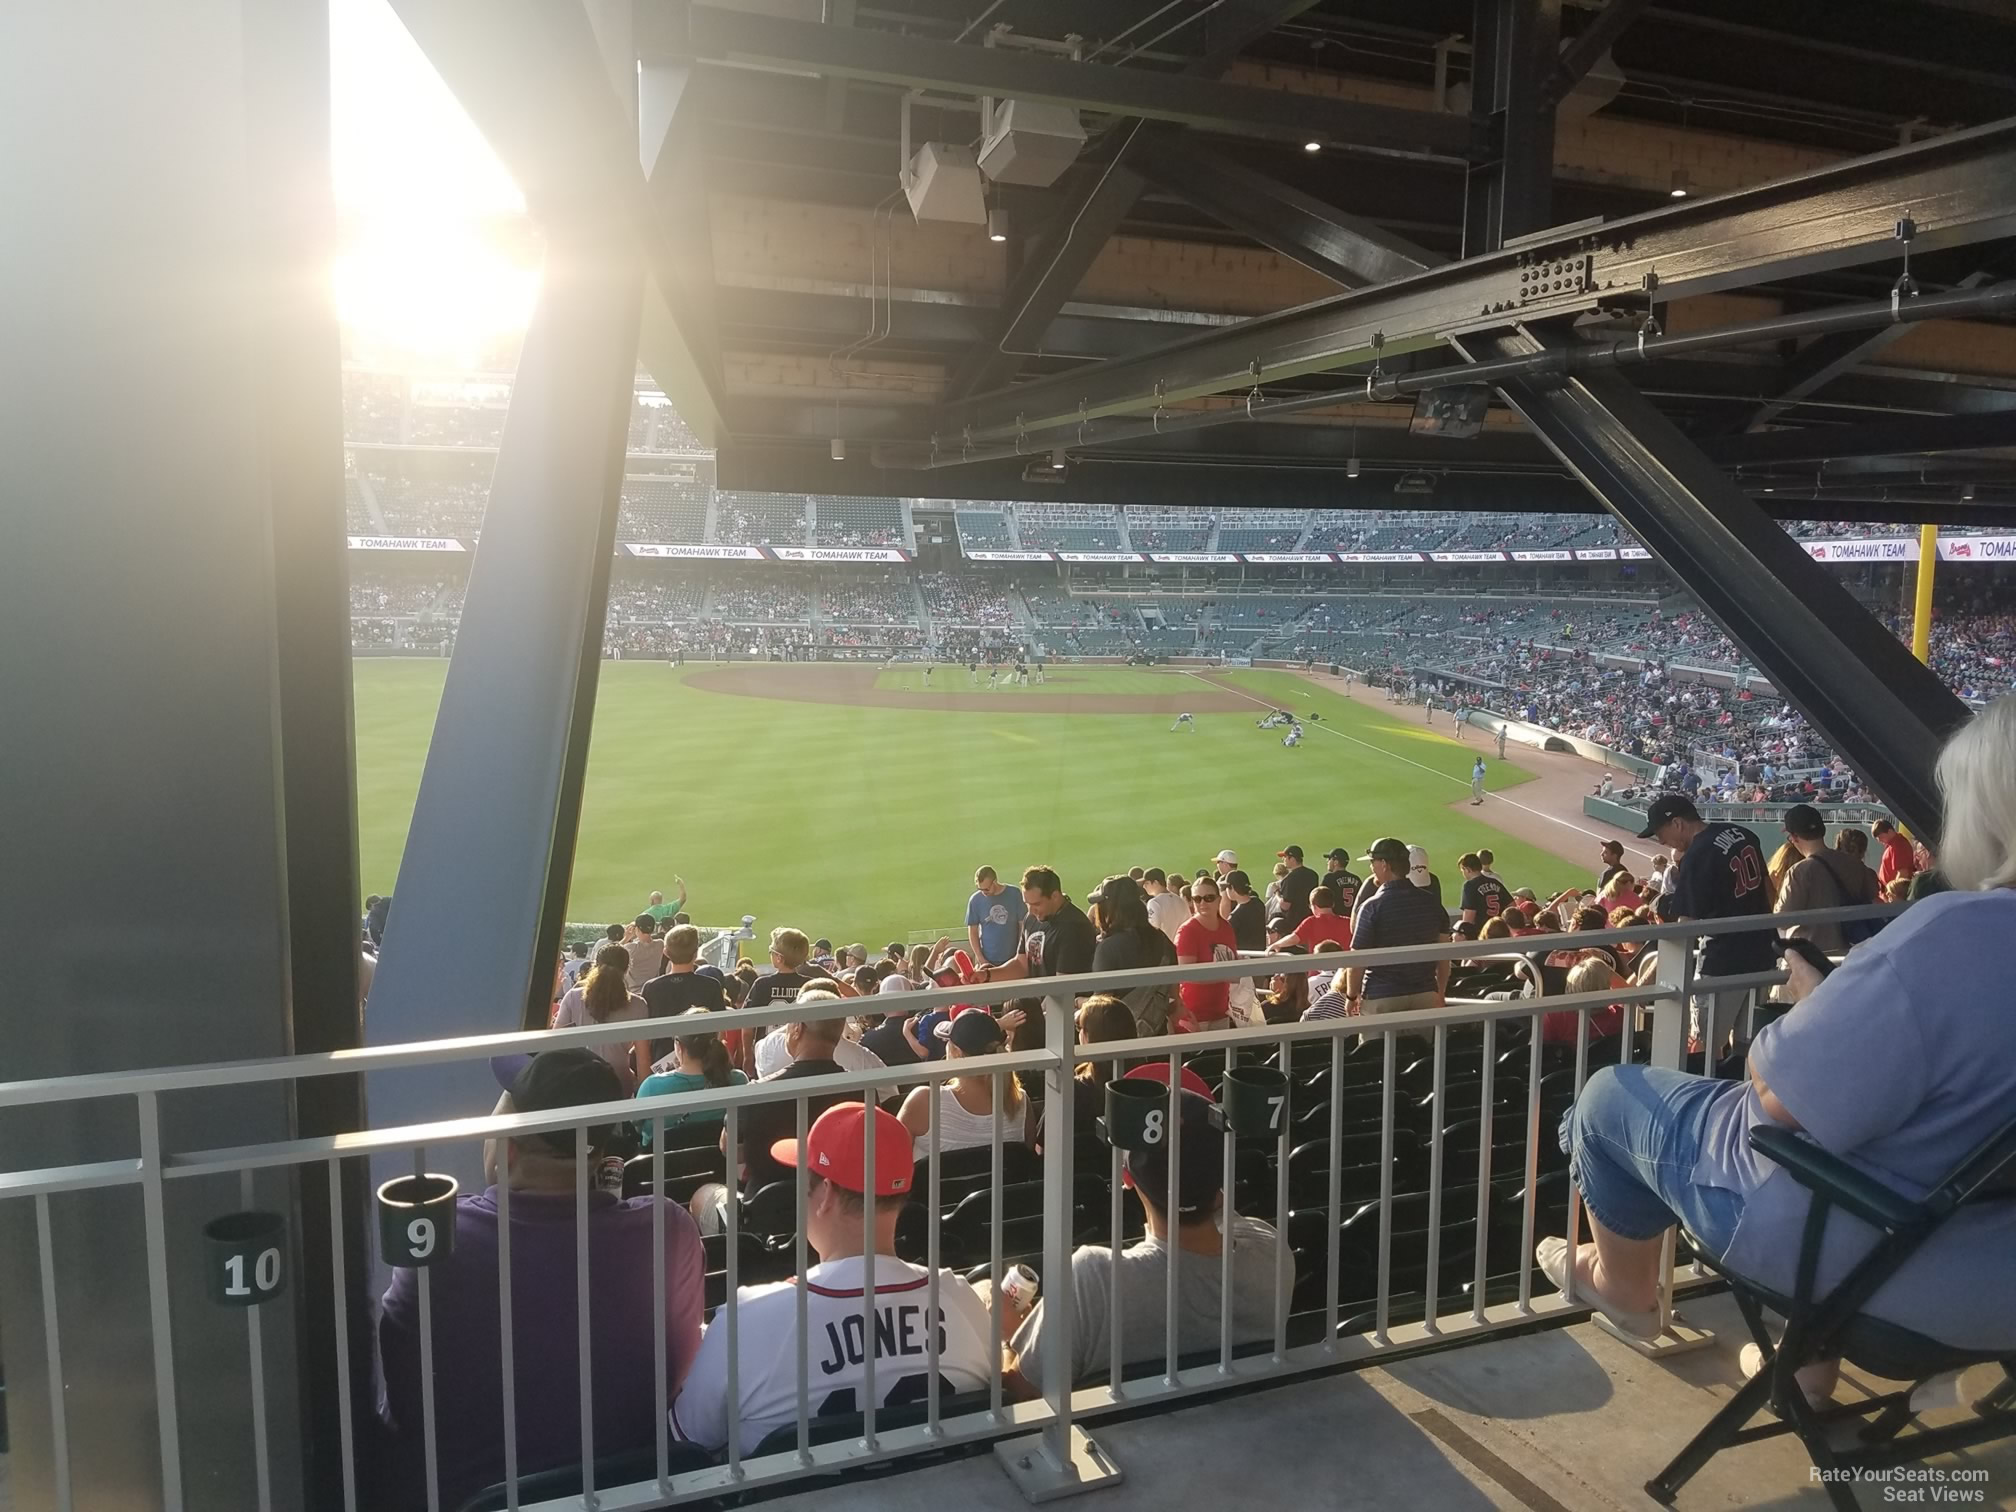 PSA: never ever ever buy seat section 146 row 26 seat 1 : r/Braves